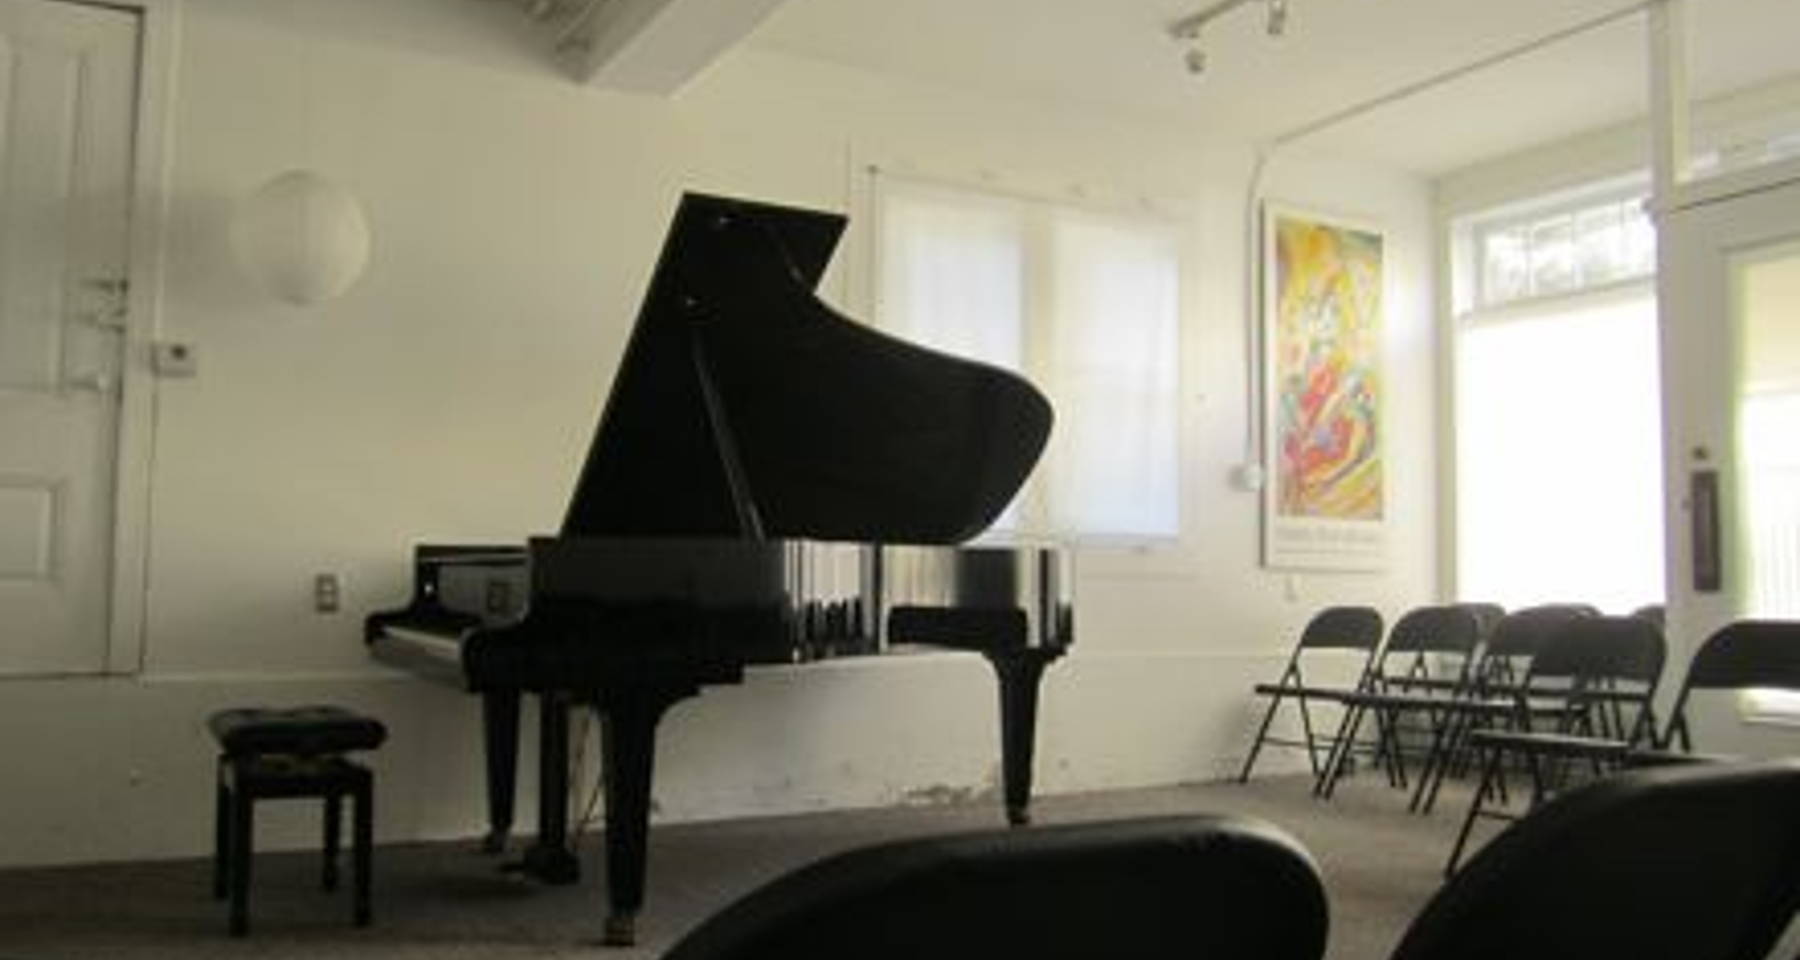 Aperitif Concert at 405 Shrader, the Haight's Intimate Recital Hall